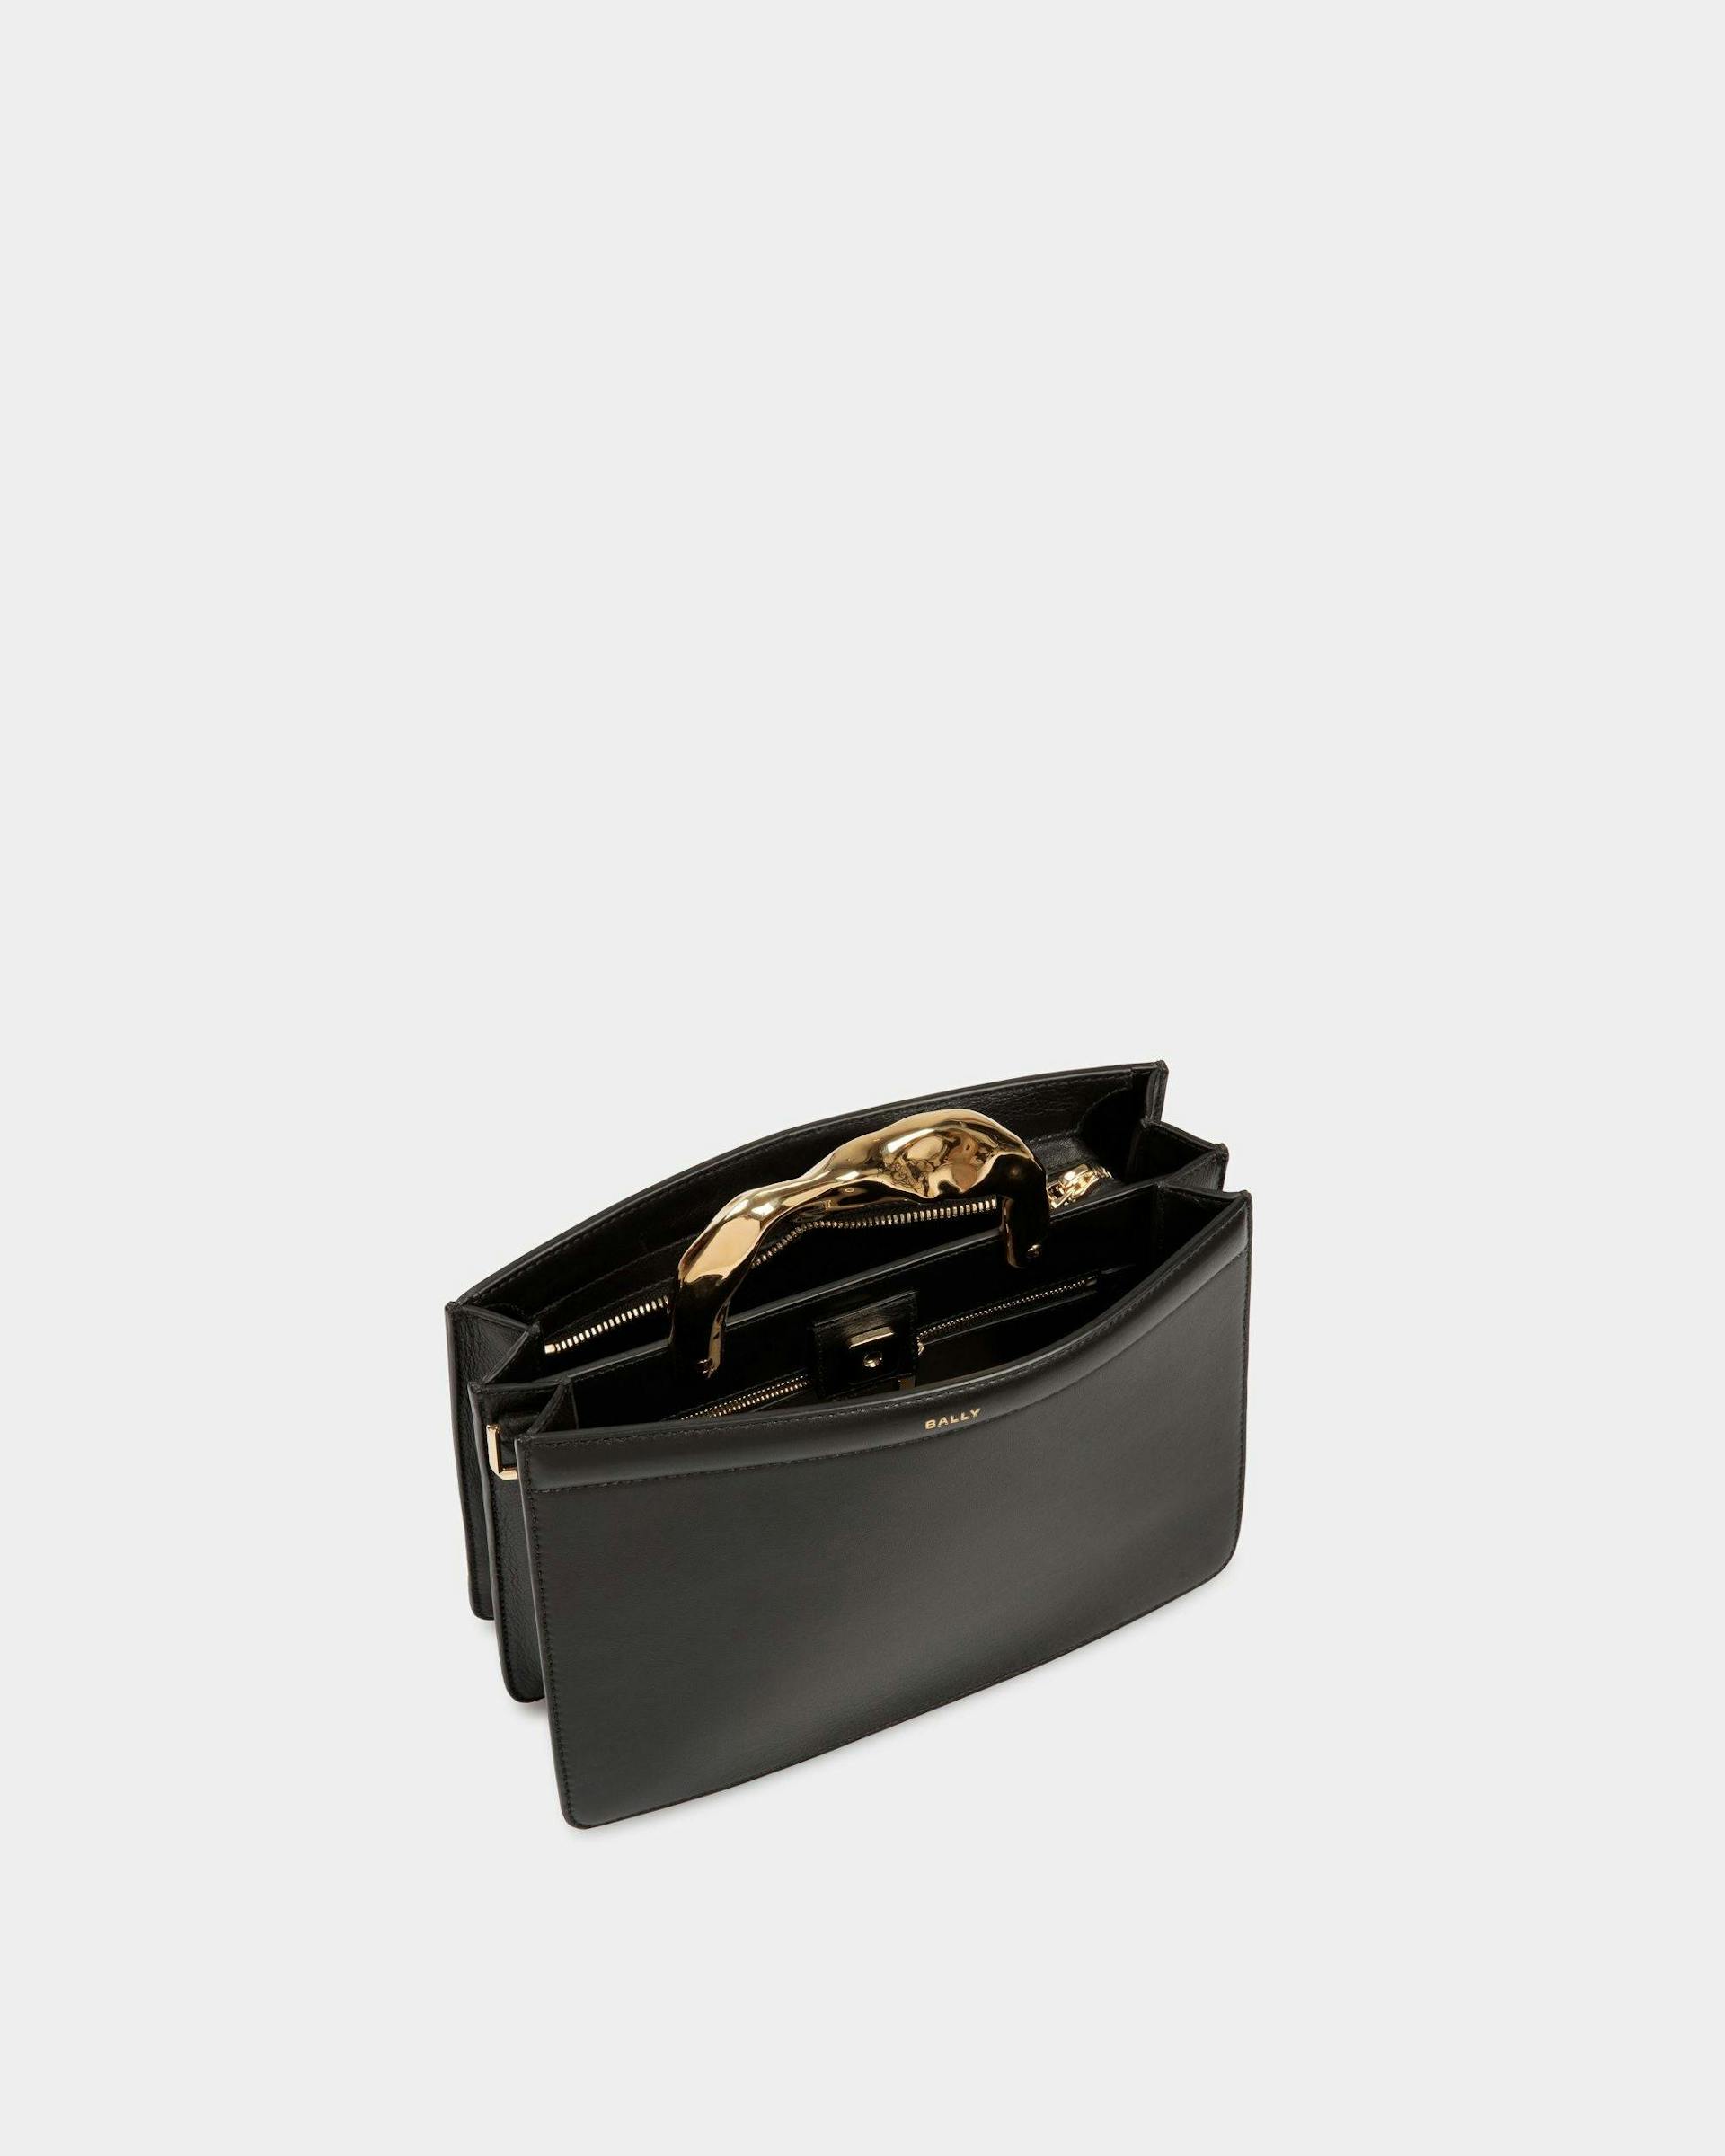 Women's Baroque Top Handle Bag In Black Leather | Bally | Still Life Open / Inside